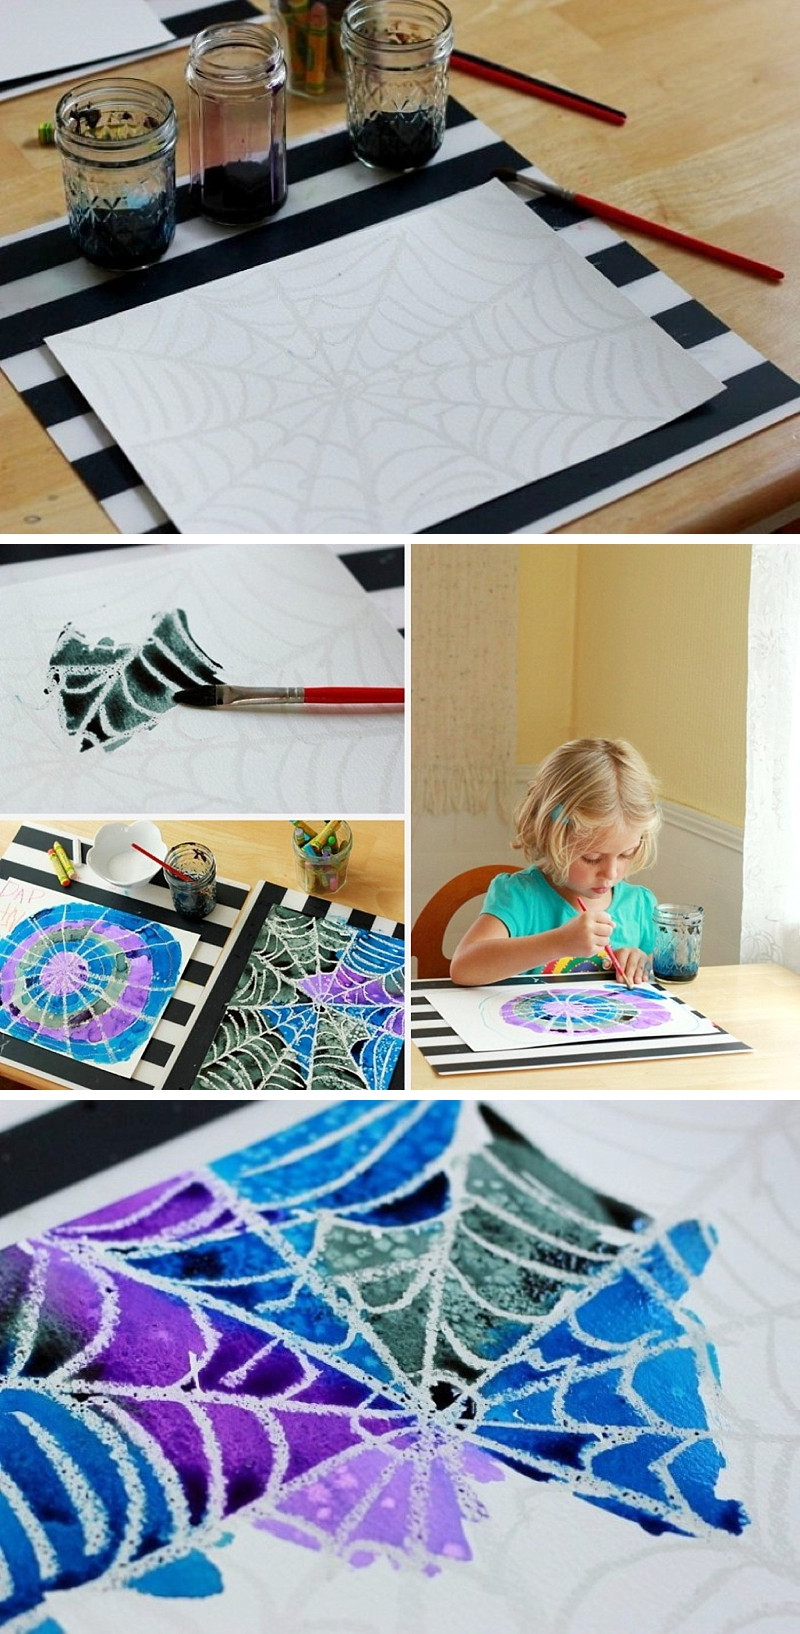 Art Project Ideas For Toddlers
 Spider Web Art Project A Simple and Beautiful